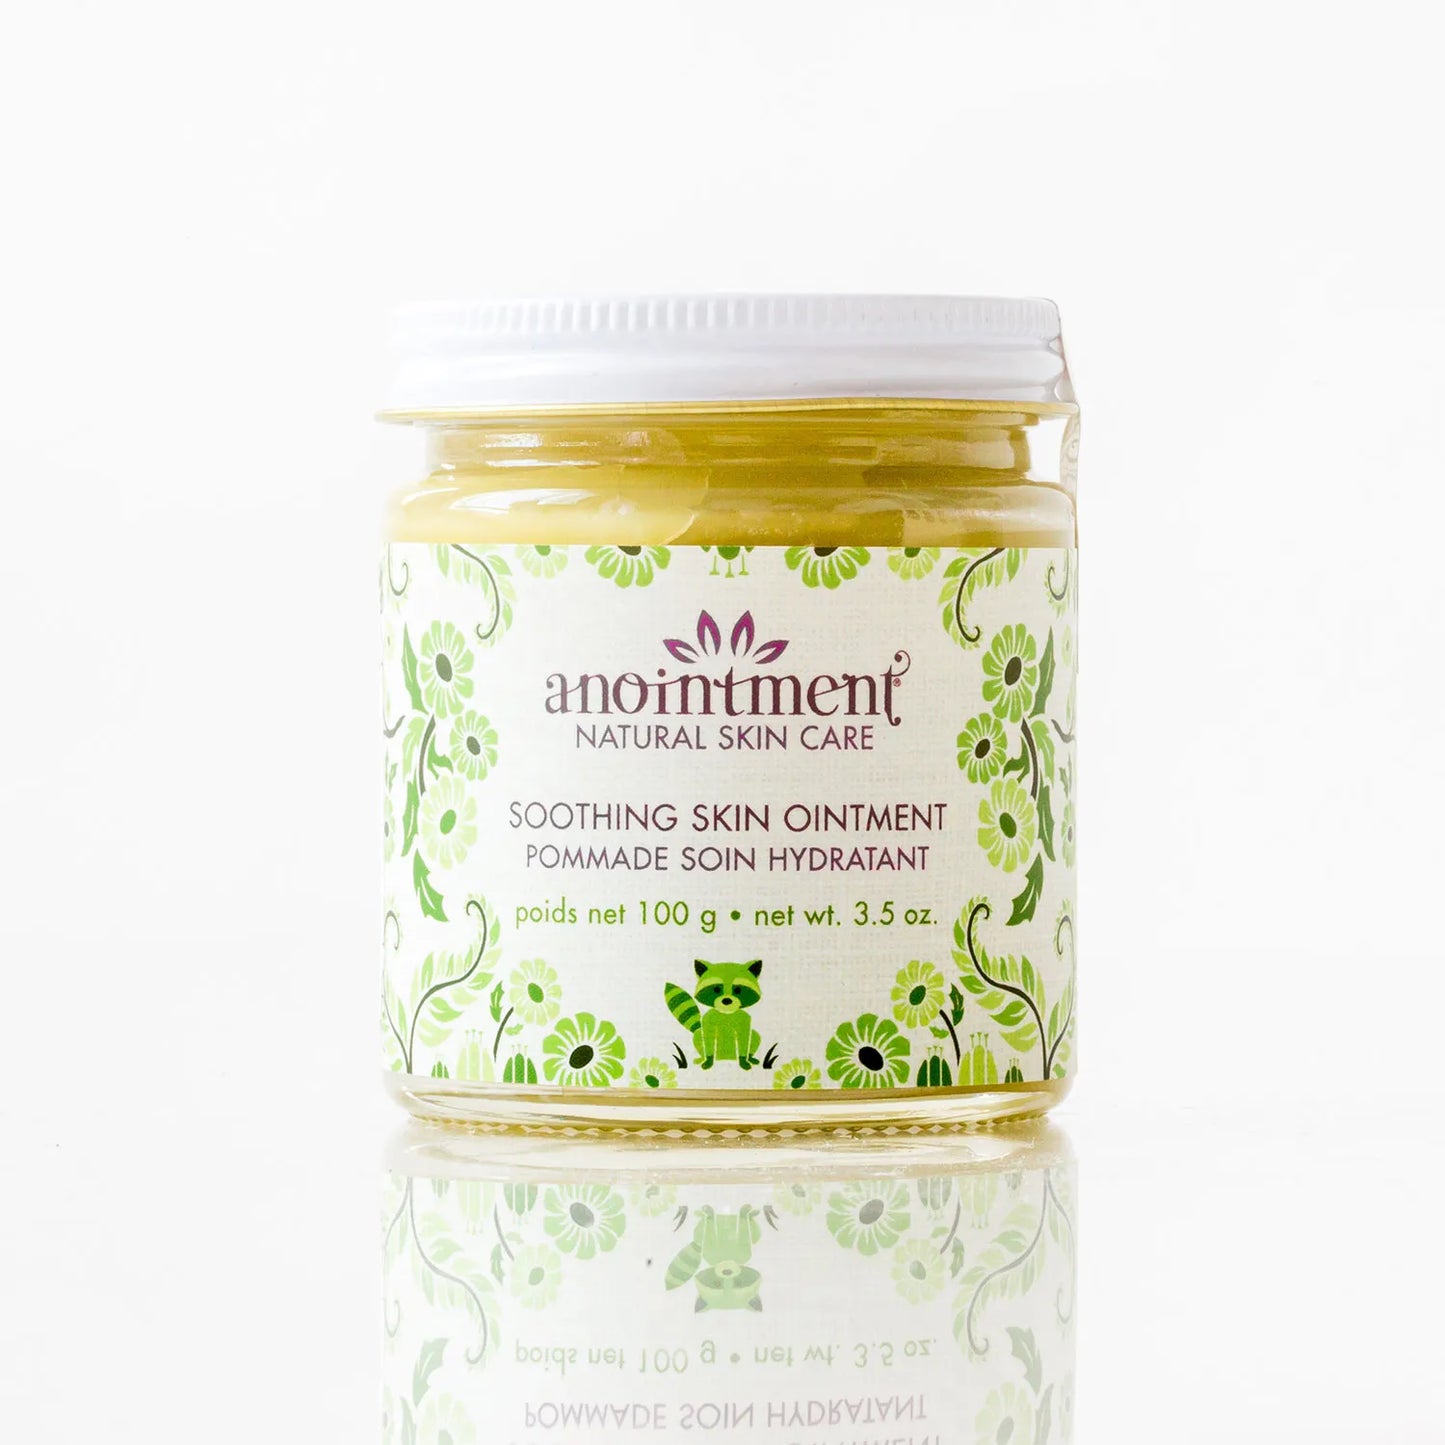 ANOINTMENT Soothing Skin Ointment 100g